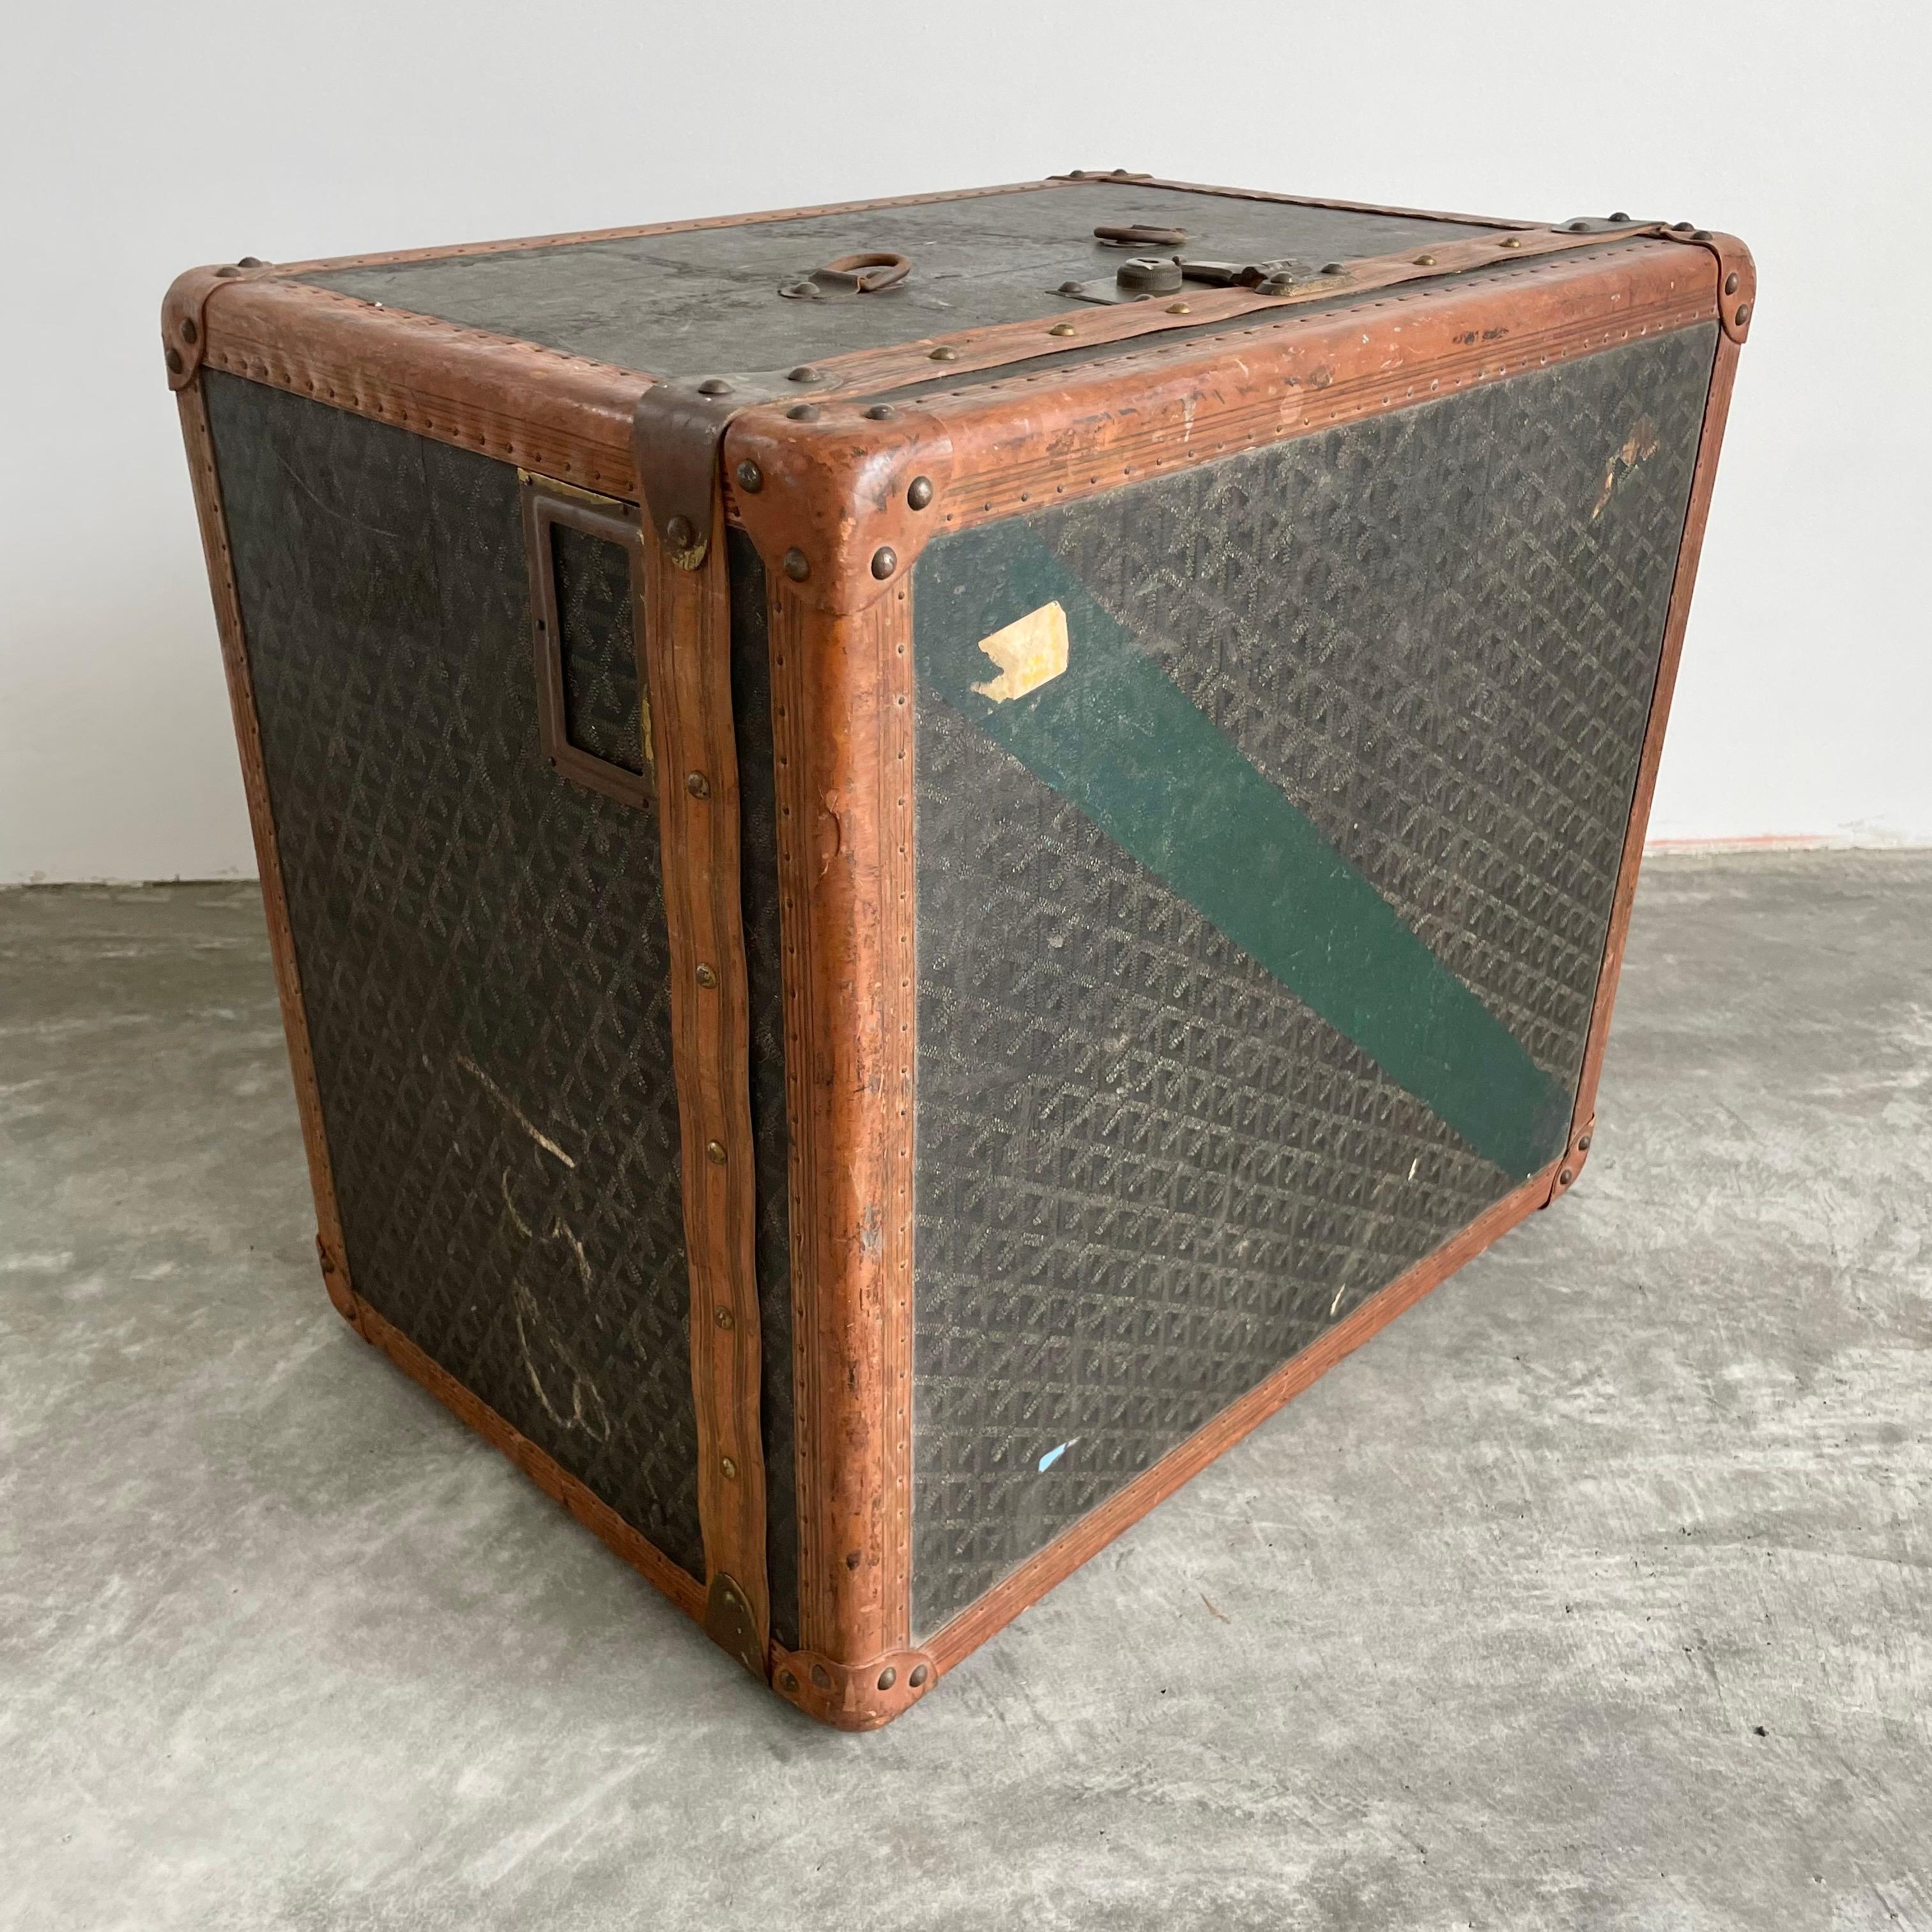 Classic vintage Goyard trunk. Iconic Goyard print with saddle leather and brass hardware. Timeless simplicity in design and iconic badging have made this brand a staple of elegance since 1853. Initially started as a malletier for the aristocrats of